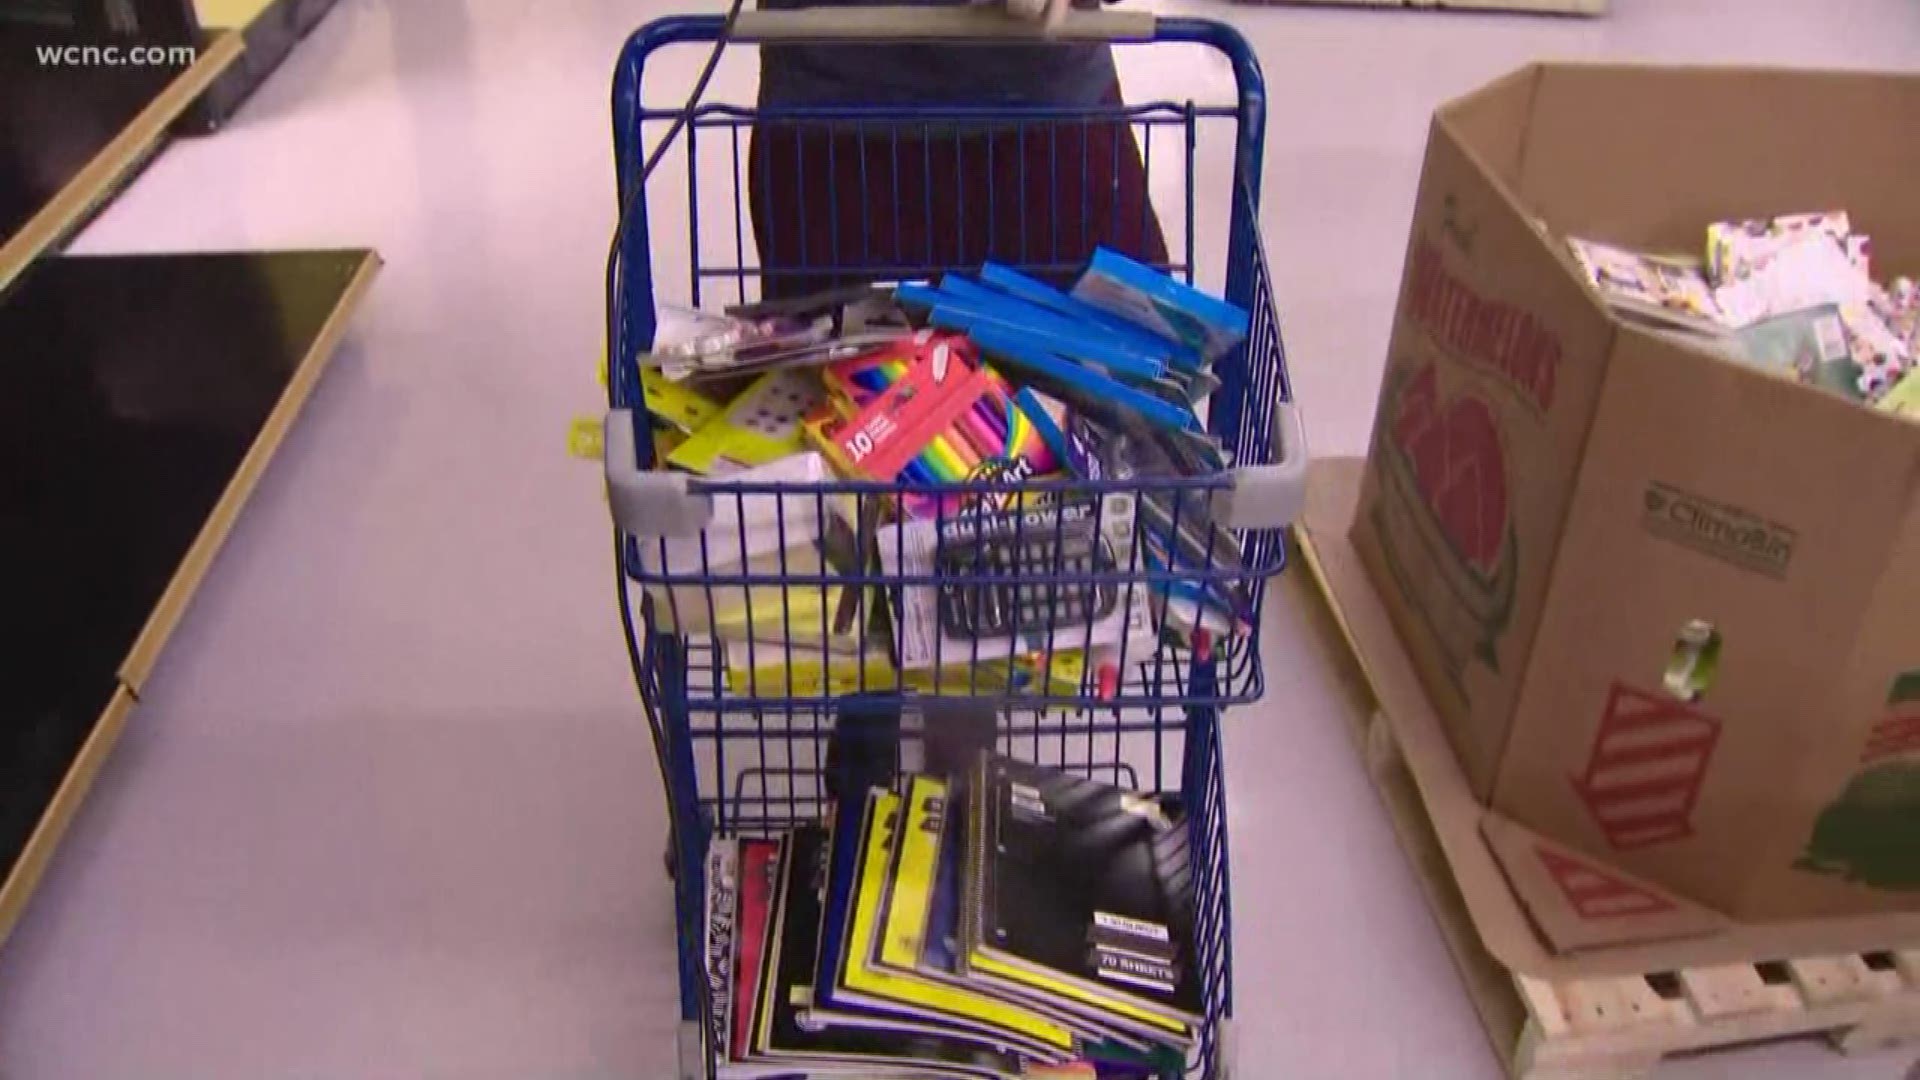 NBC Charlotte is teaming with Classroom Central to help teachers in high-poverty areas get essential supplies for their students.